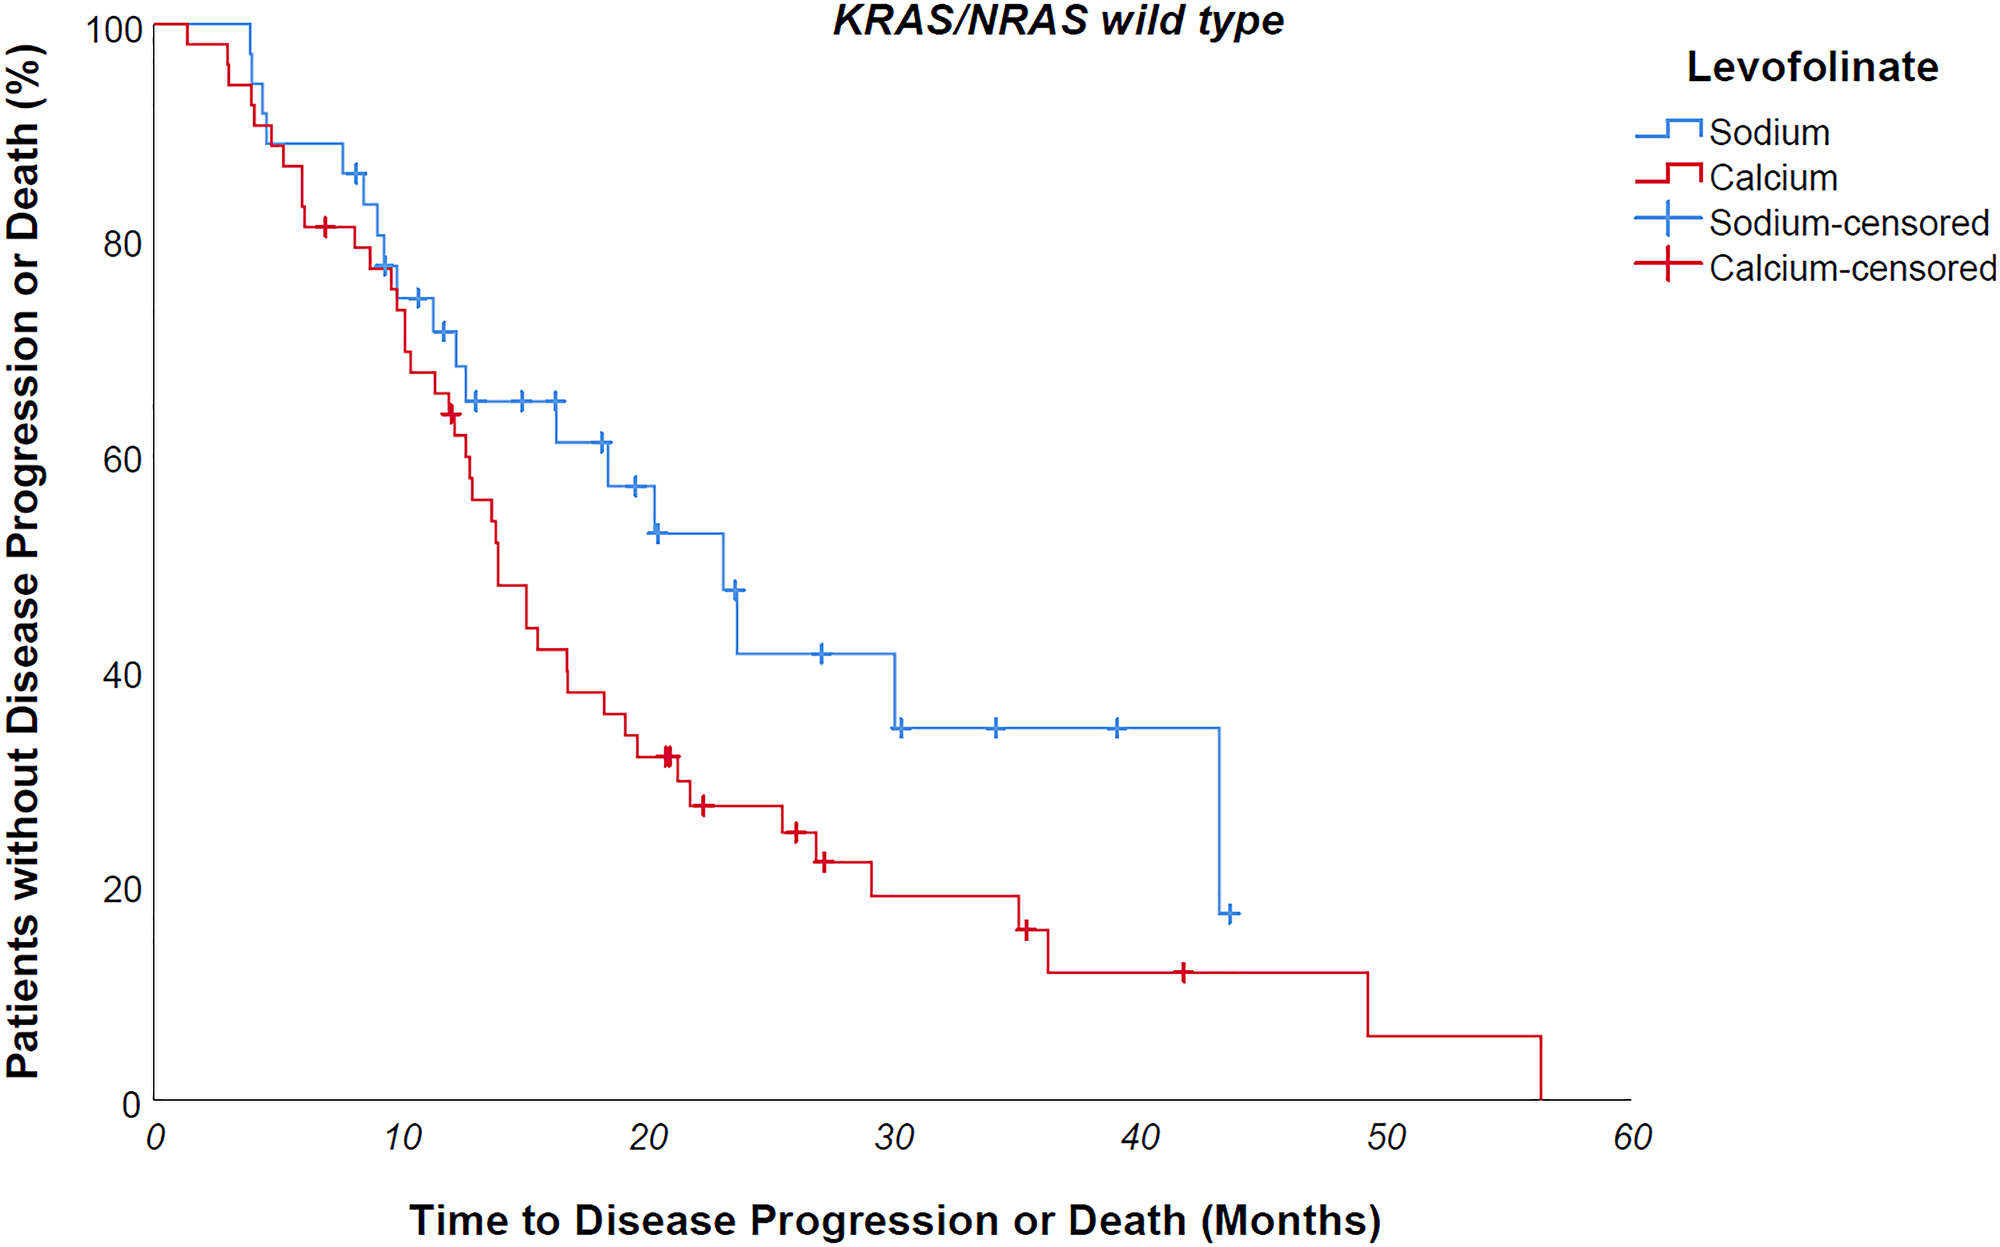 KRAS/NRAS wild type NaLF treated patients progressed 9 months later than CaLF treated counterpart, though not in a statistically significant way (median PFS 23,1 vs 14 months, p value 0,085).